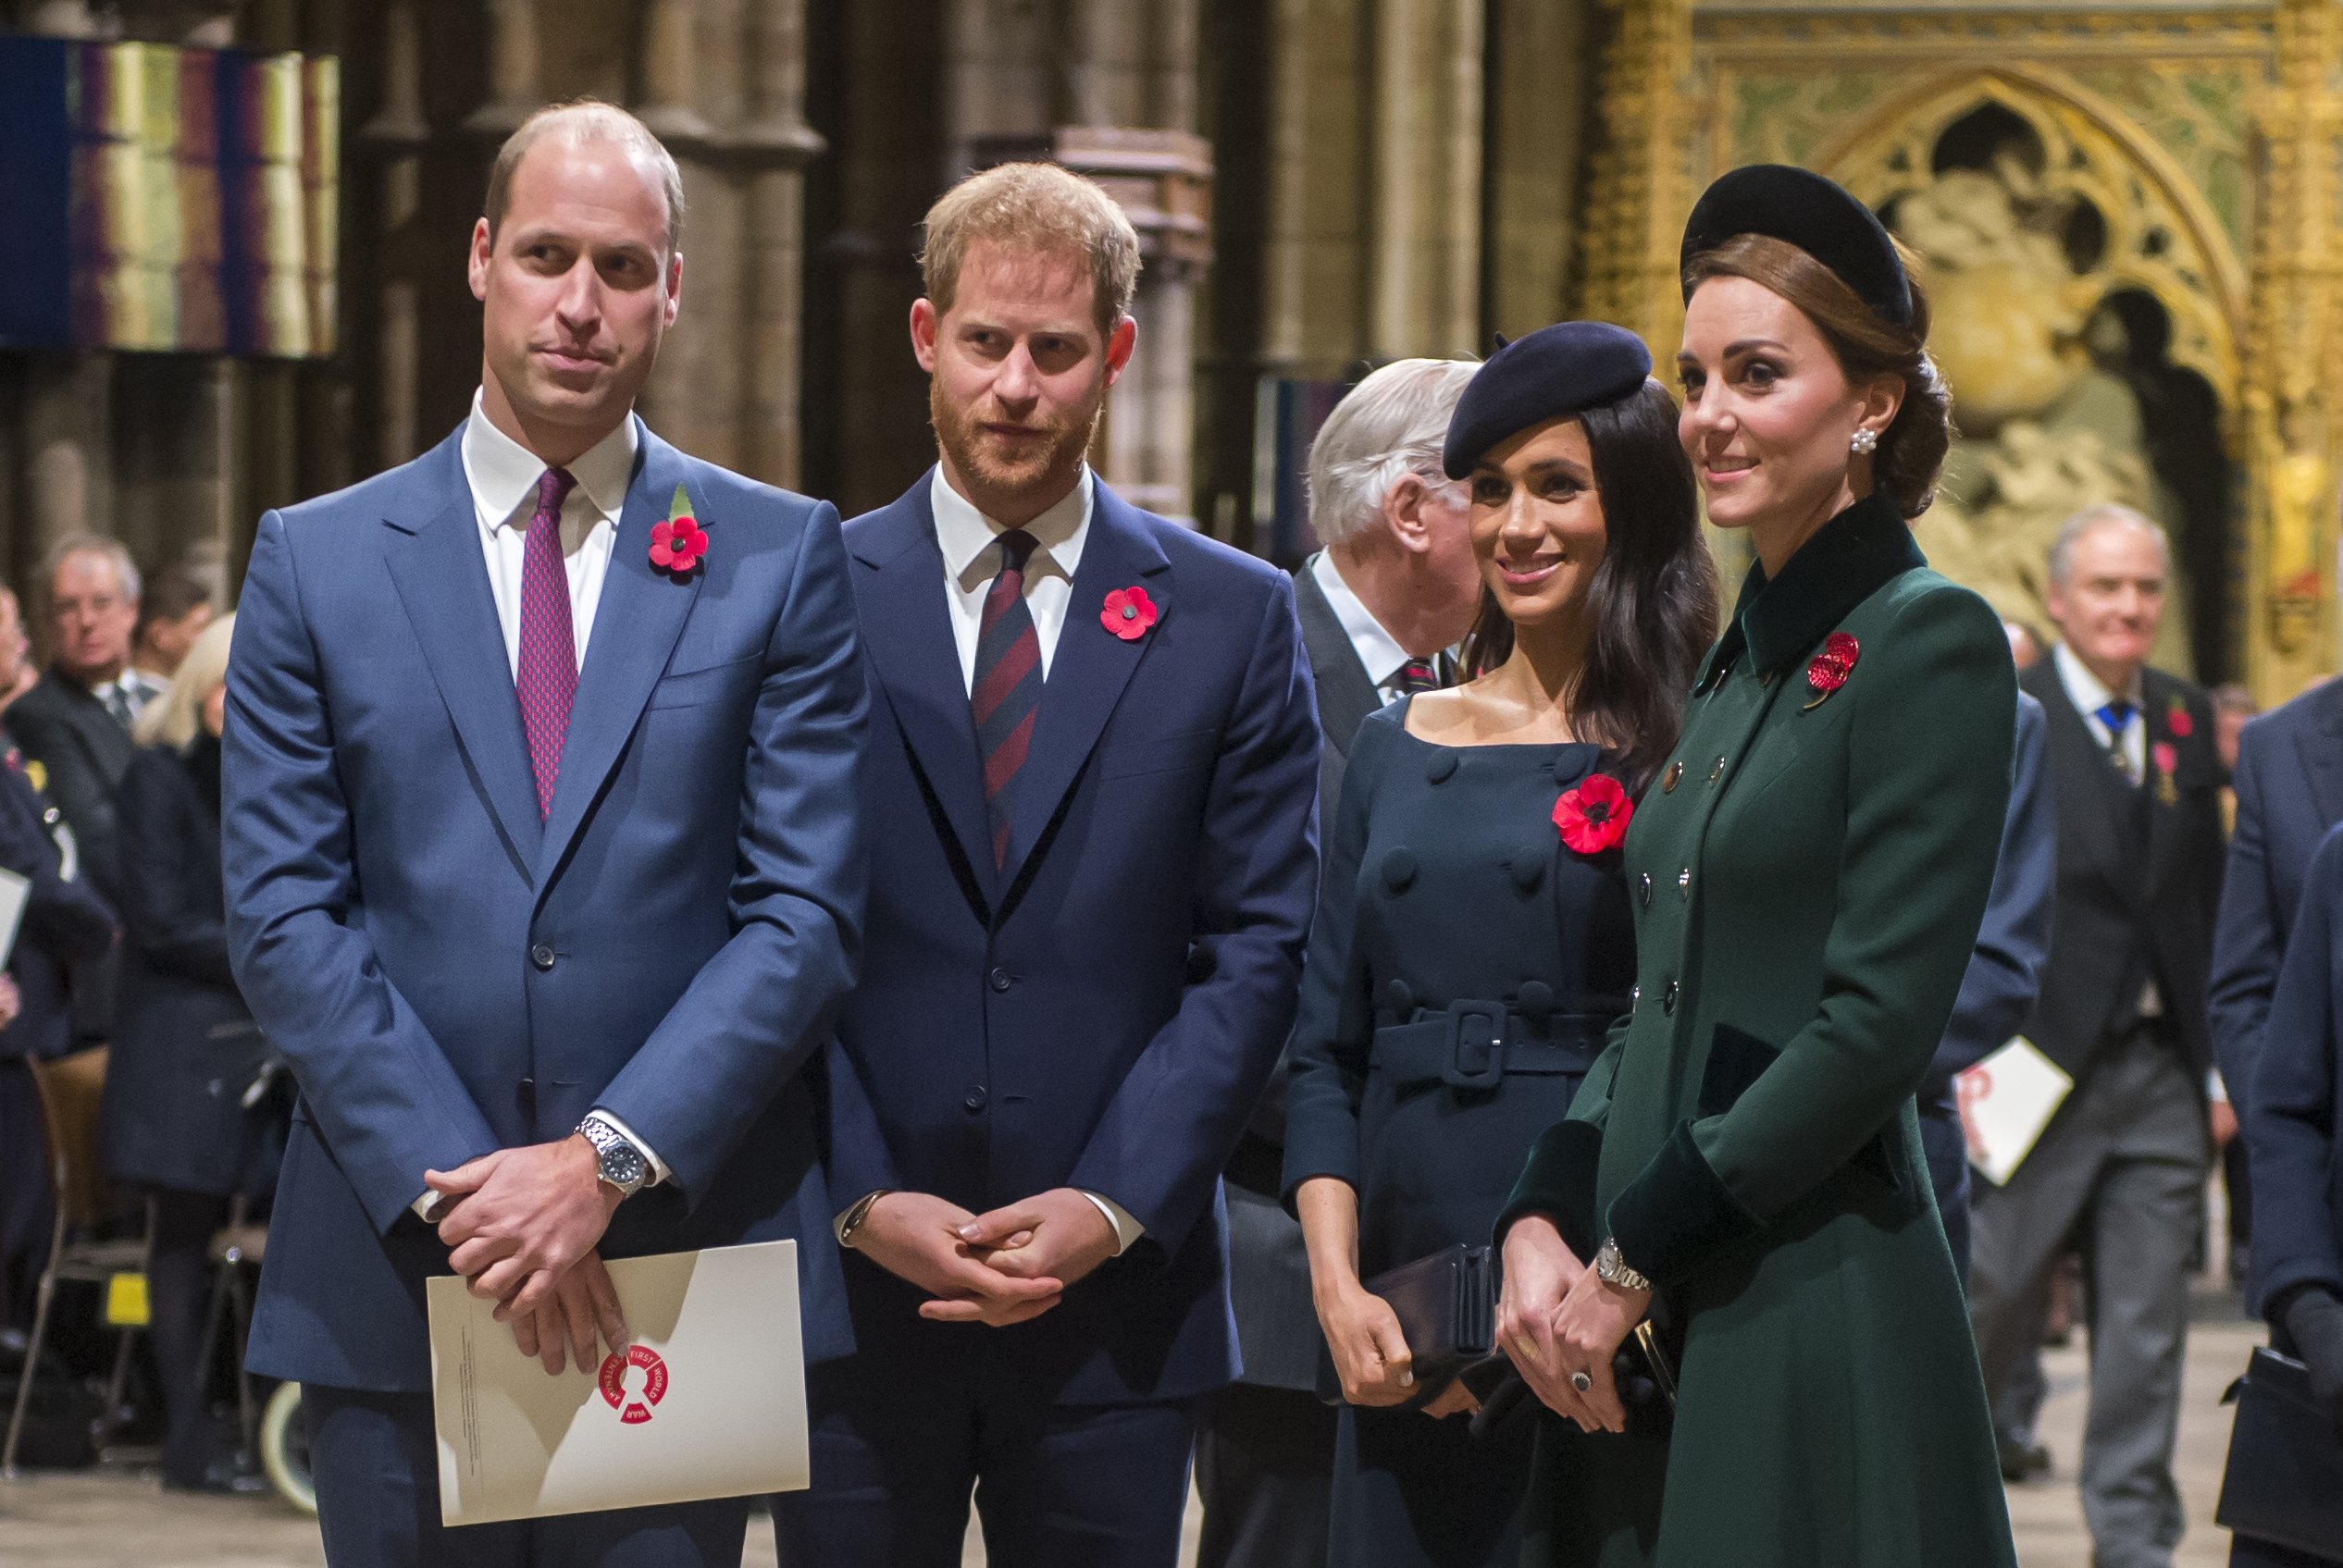 Prince William, Prince Harry, Meghan Markle and Kate Middleton arriving at Westminster Abbey to attend a service to mark the centenary of the Armistice on November 11, 2018 in London. | Source: Getty Images